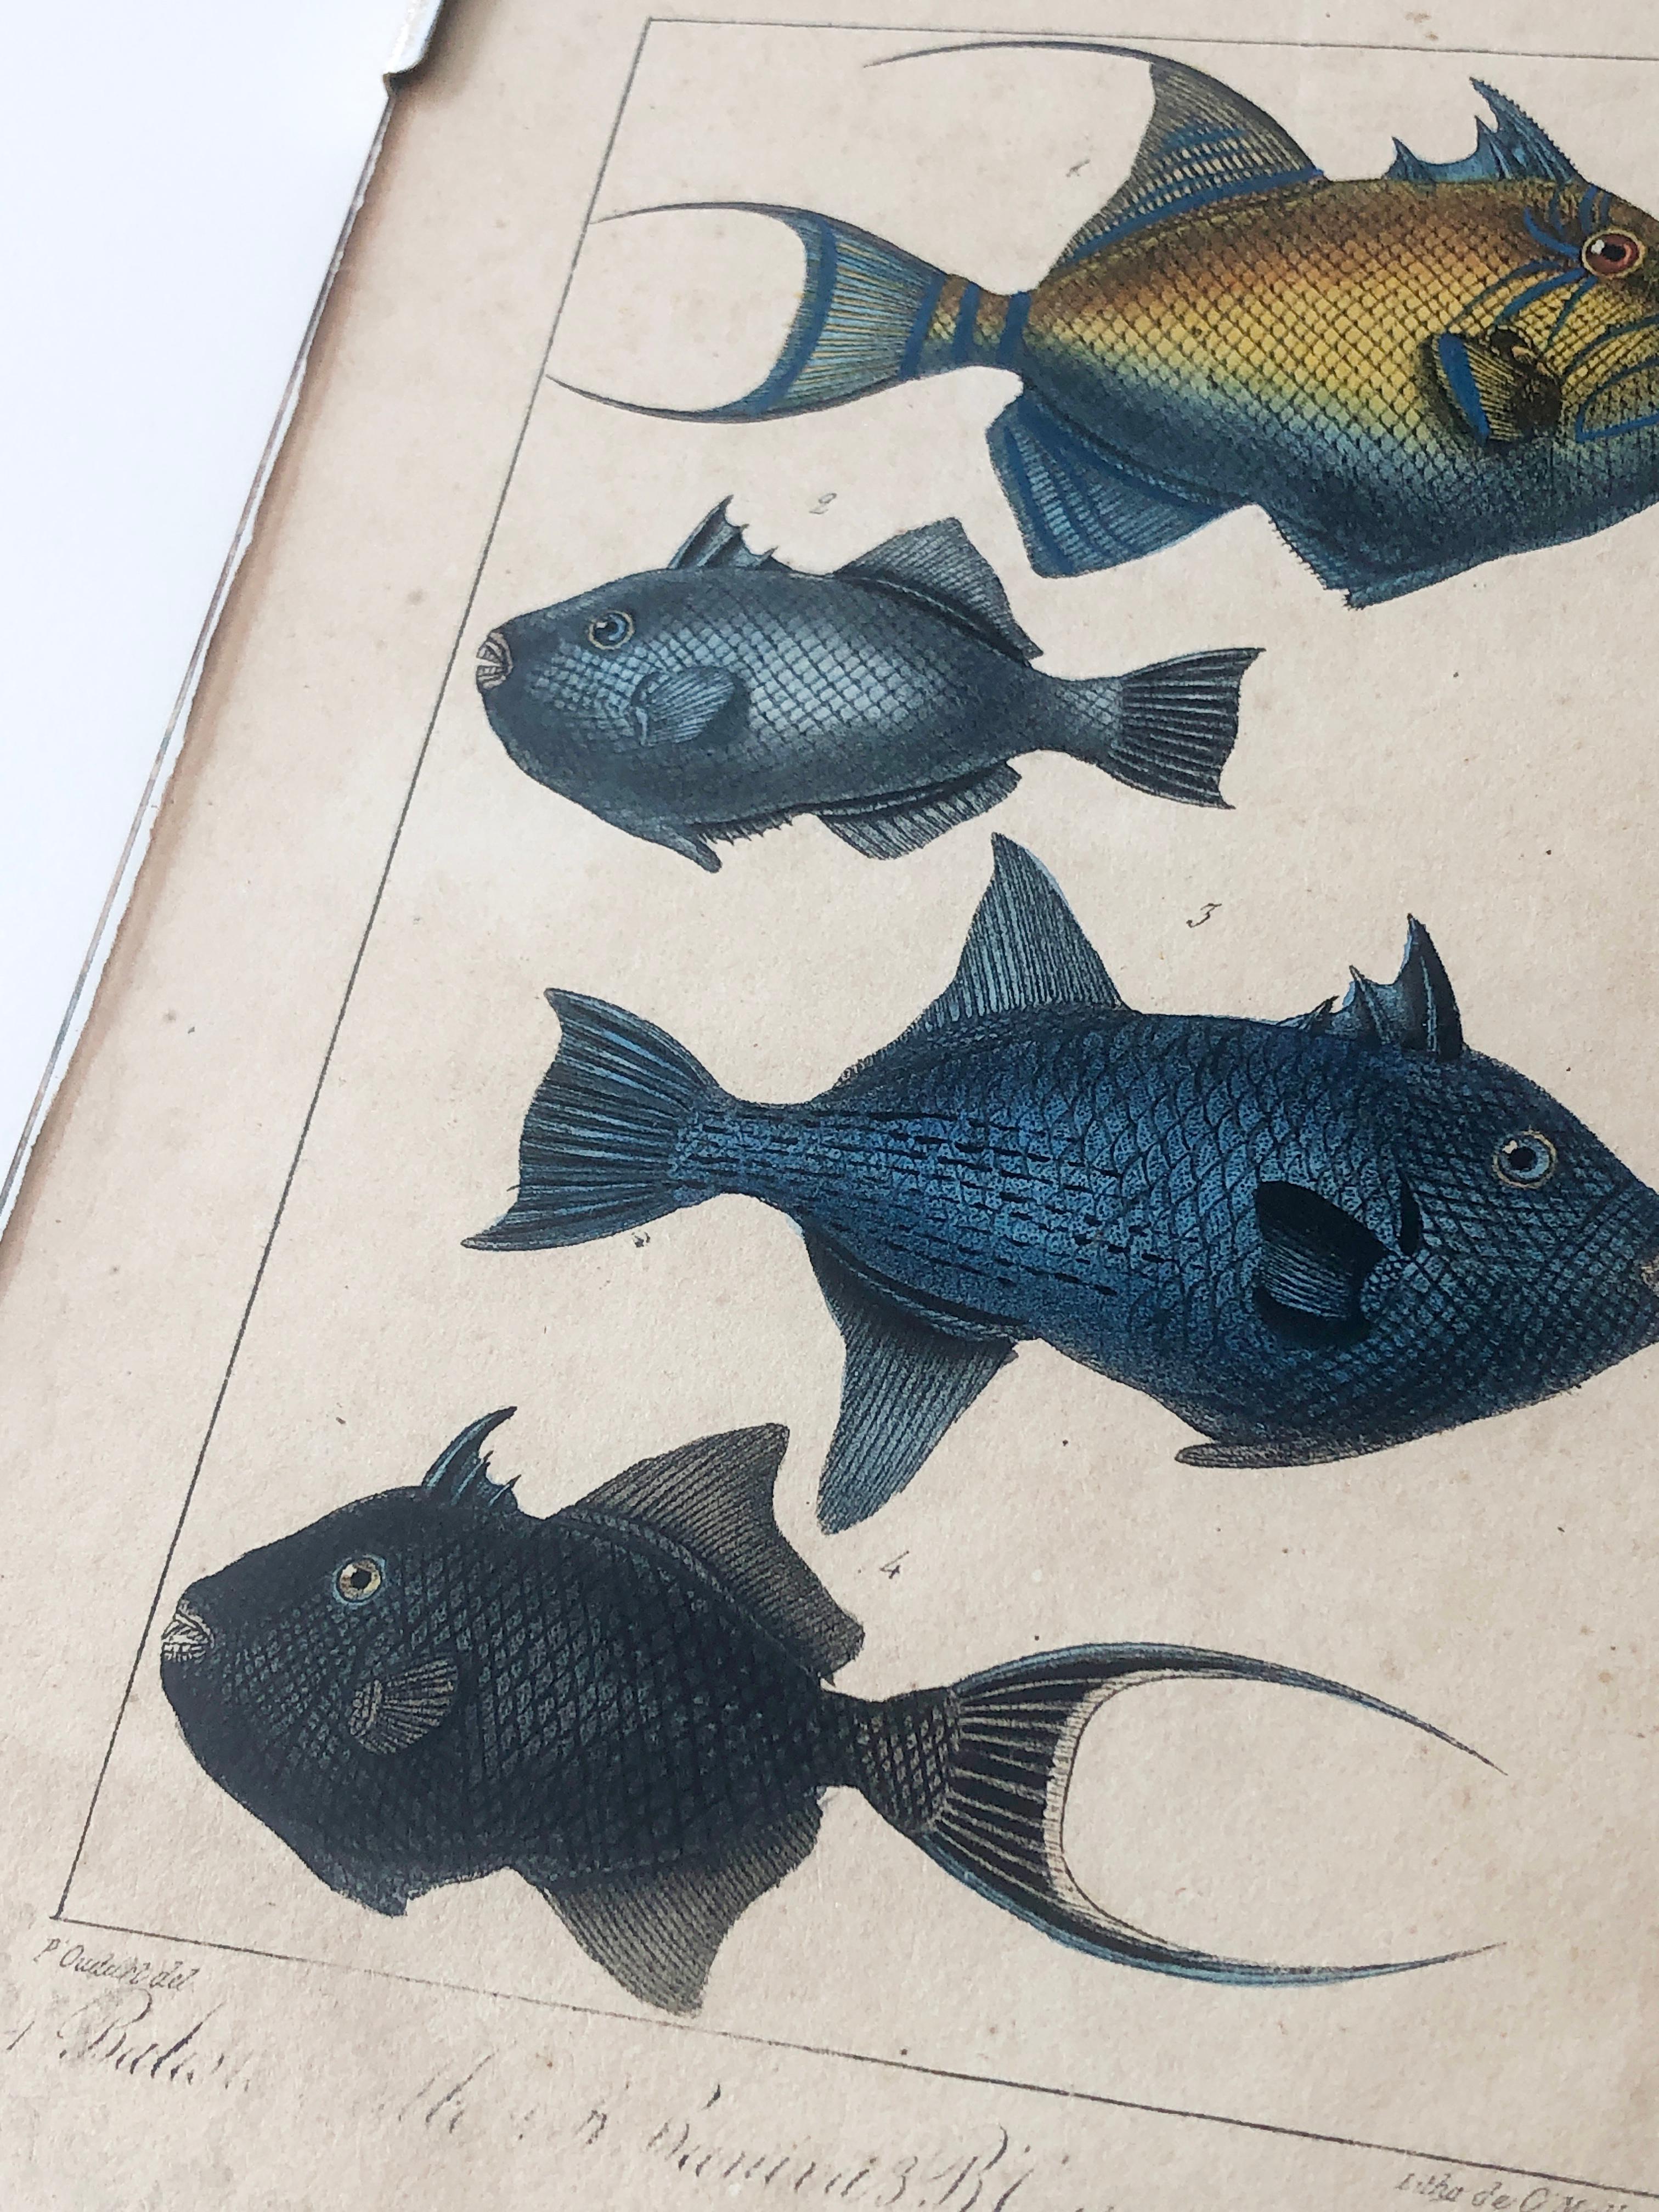 Metal Natural history lithograph, 4 tropical fish - Plate 32 - P. Oudart & C. Motte For Sale